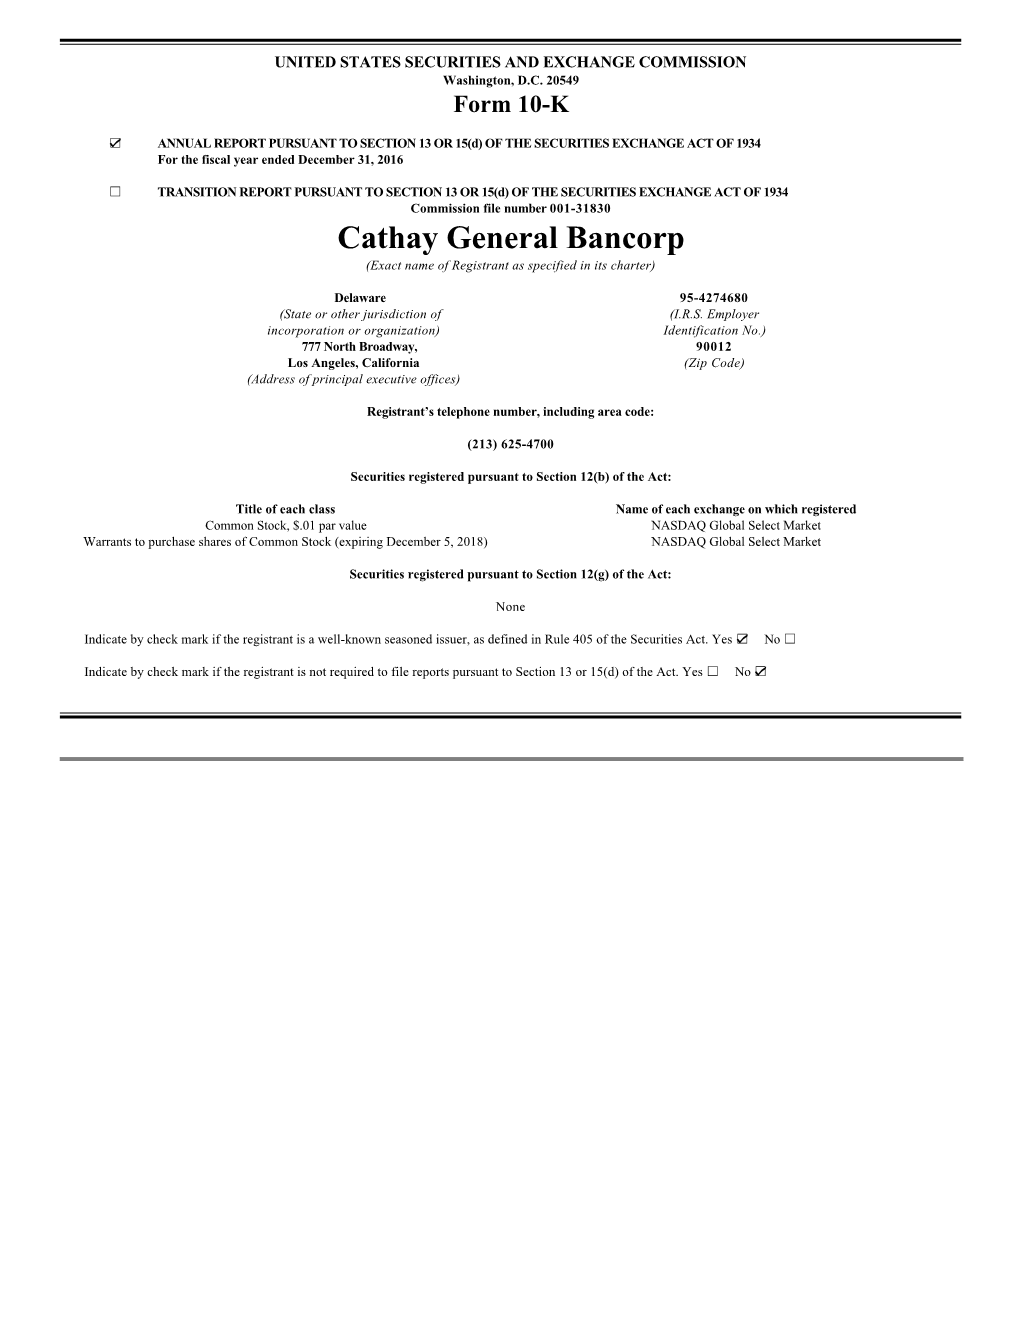 Cathay General Bancorp (Exact Name of Registrant As Specified in Its Charter)